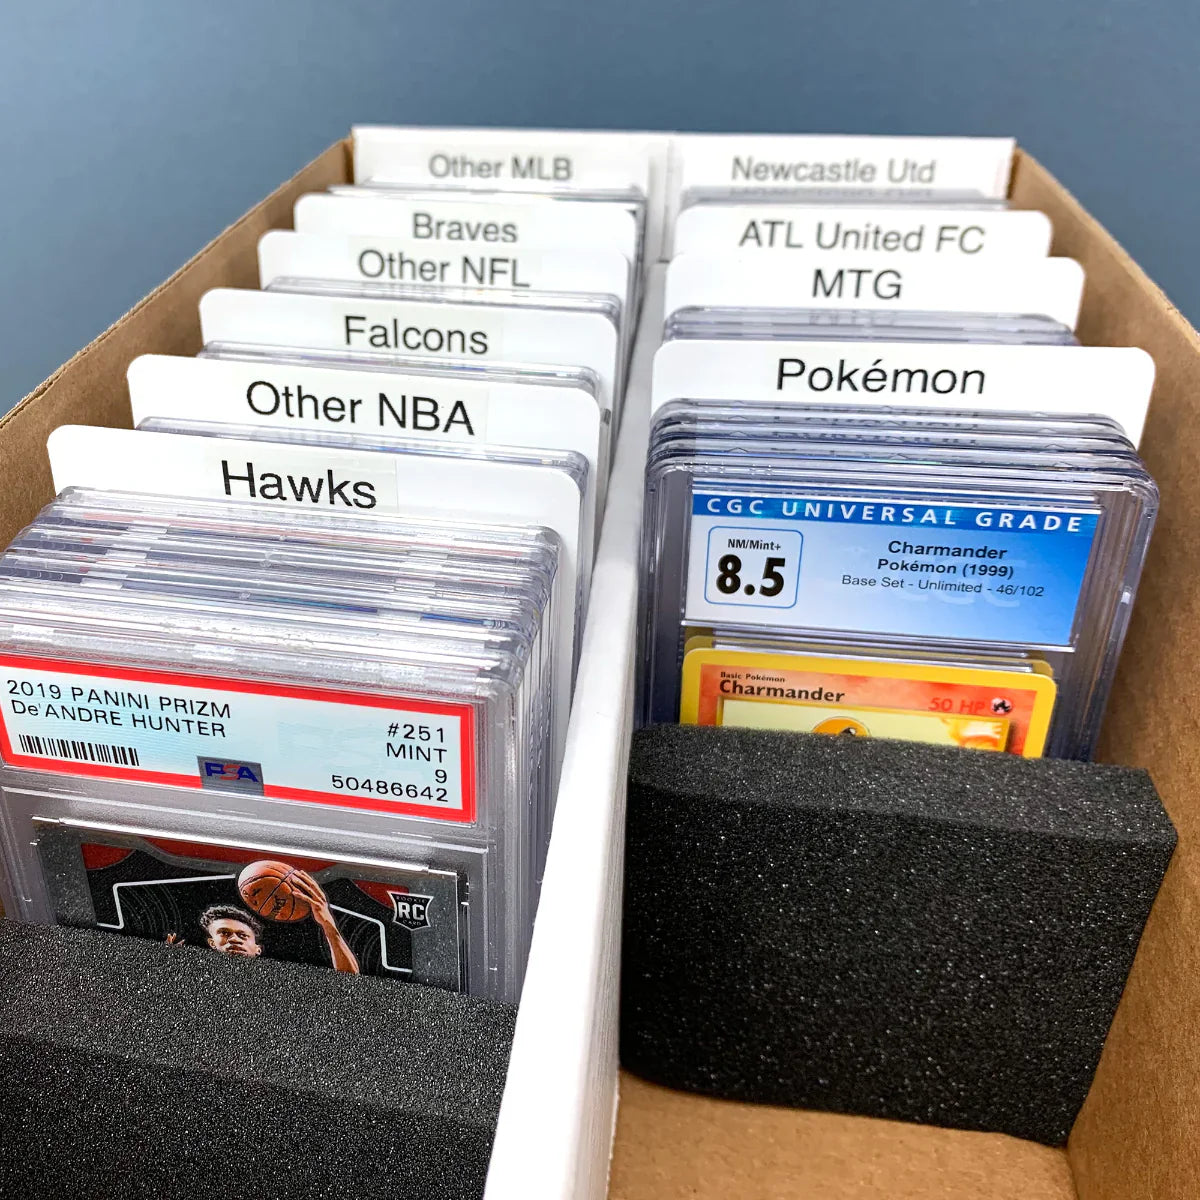 BCW: Graded Trading Card Dividers (10 Dividers)